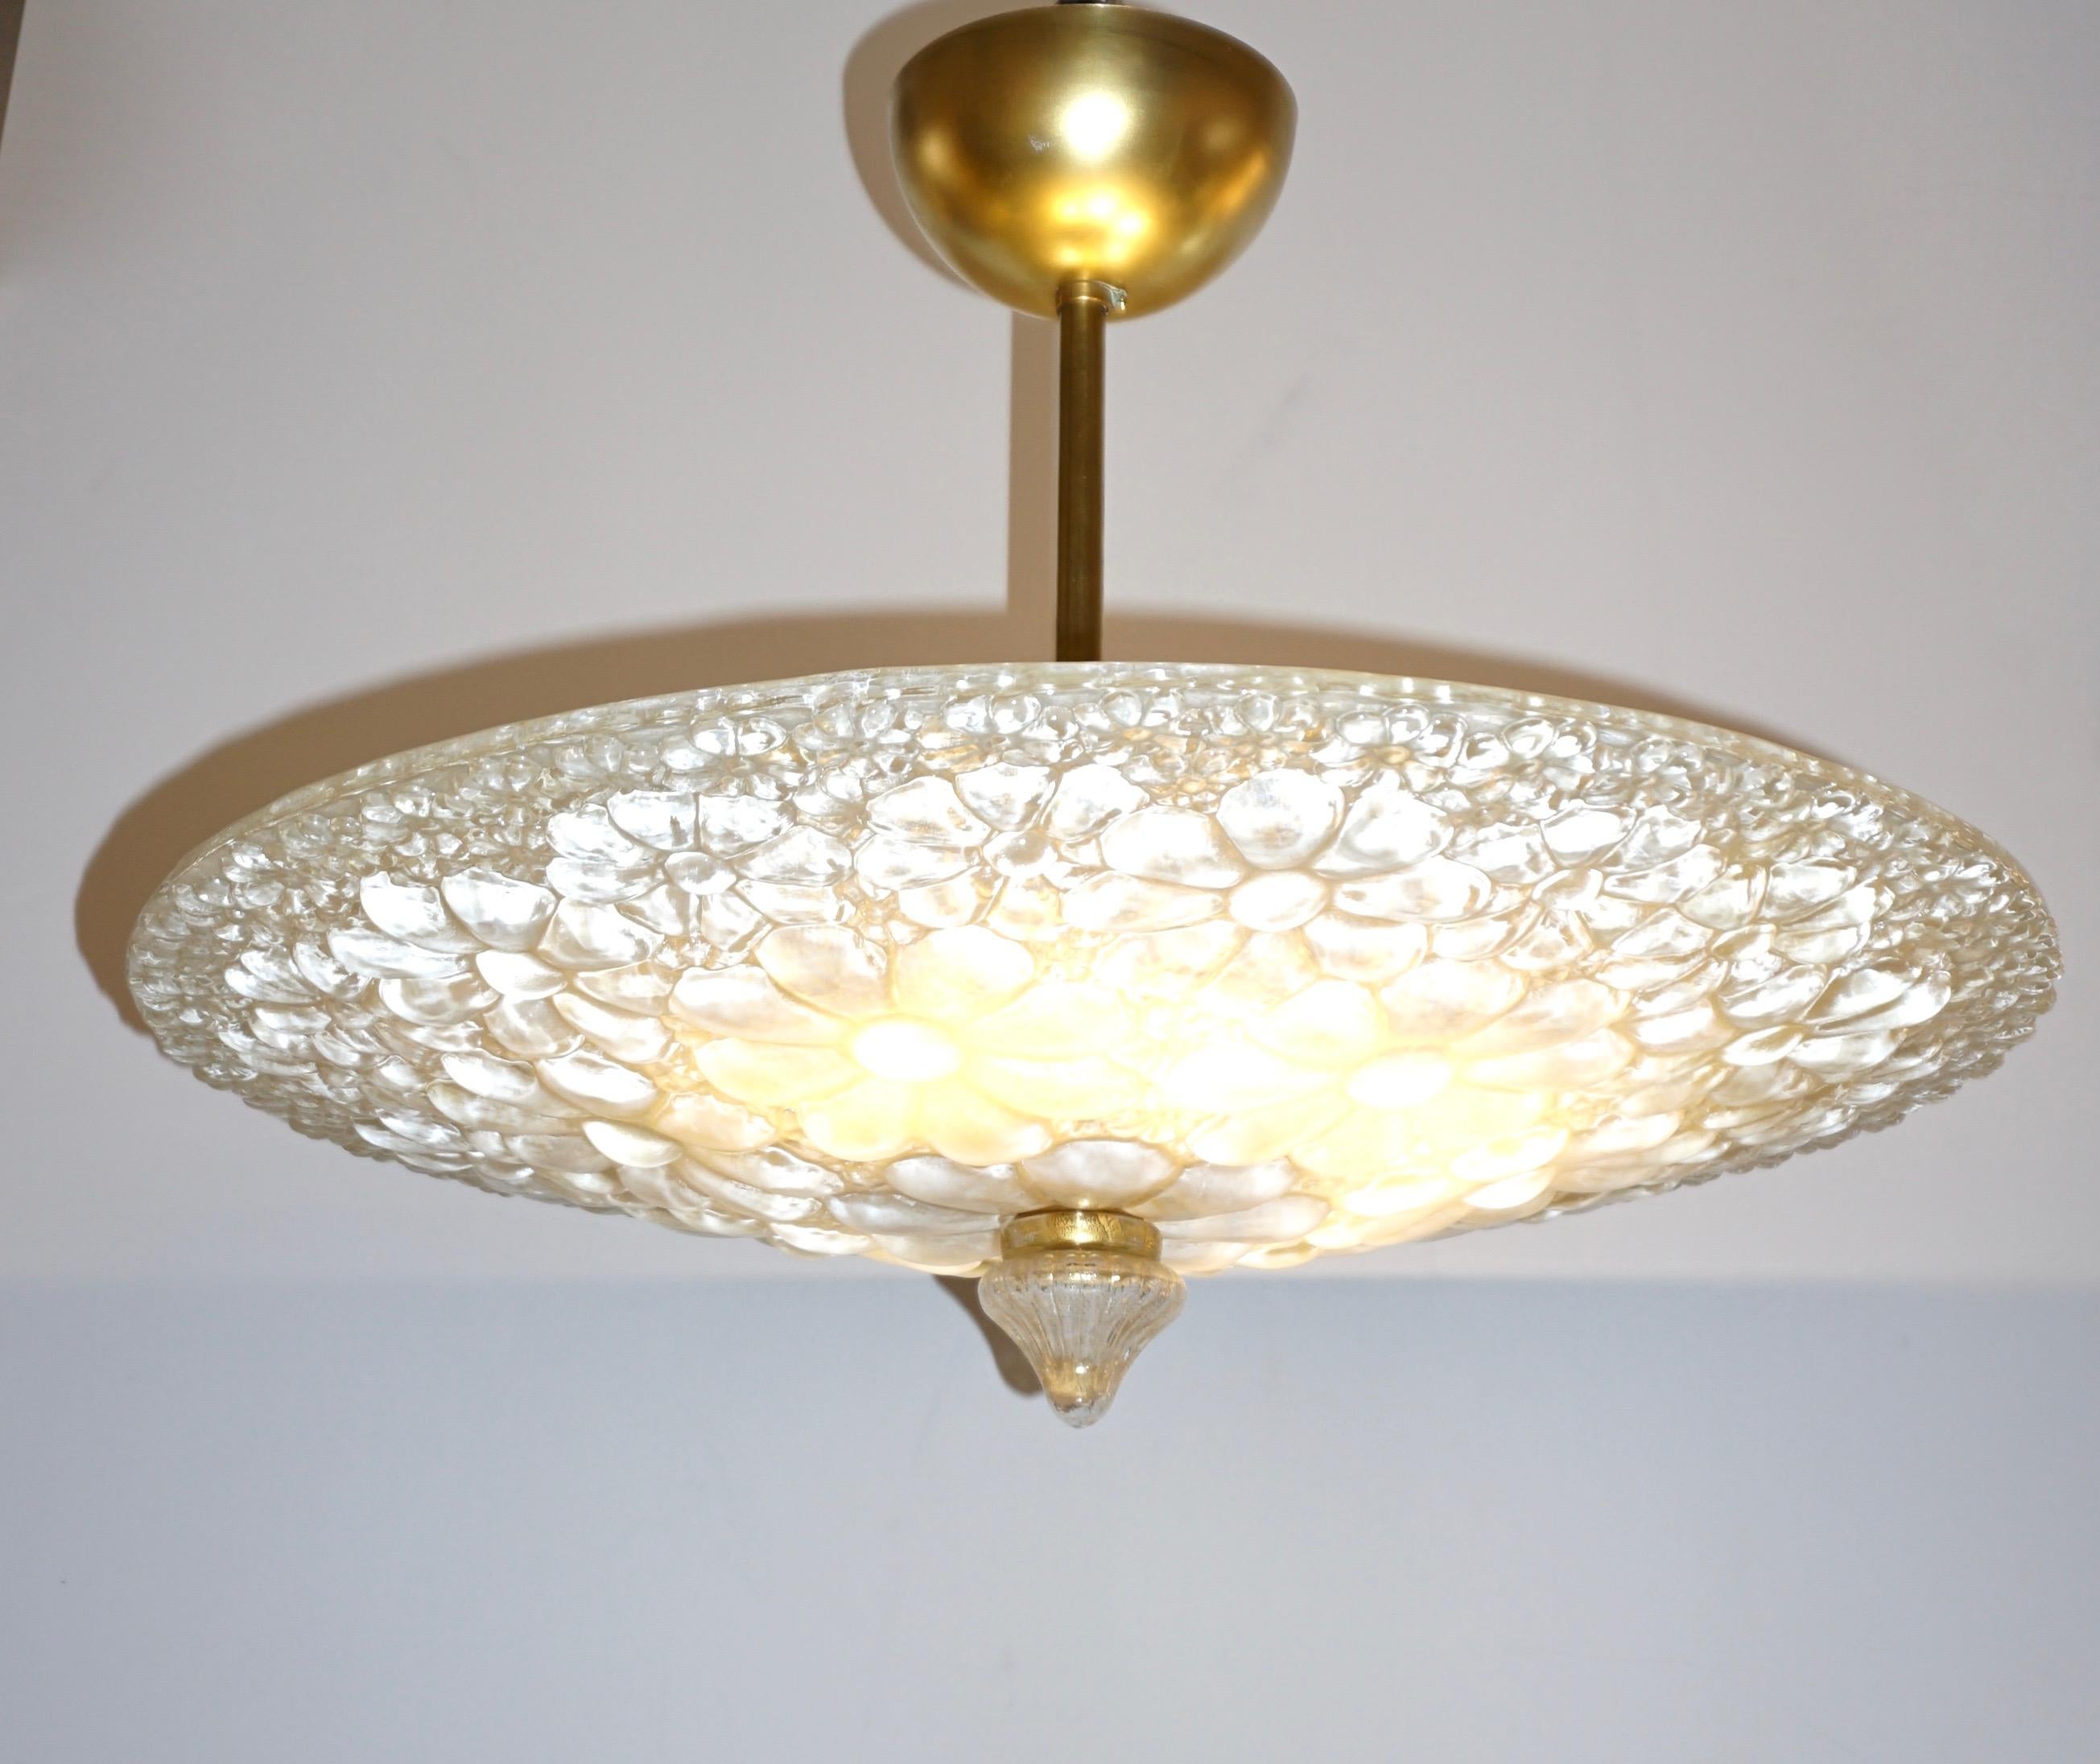 This modern Art Deco design light fixture with brass hardware features a distinctive bowl with a shallow dome form in ivory Murano glass worked with the scavo technique on the inside and overlaid on the outside with embossed petal starburst floral